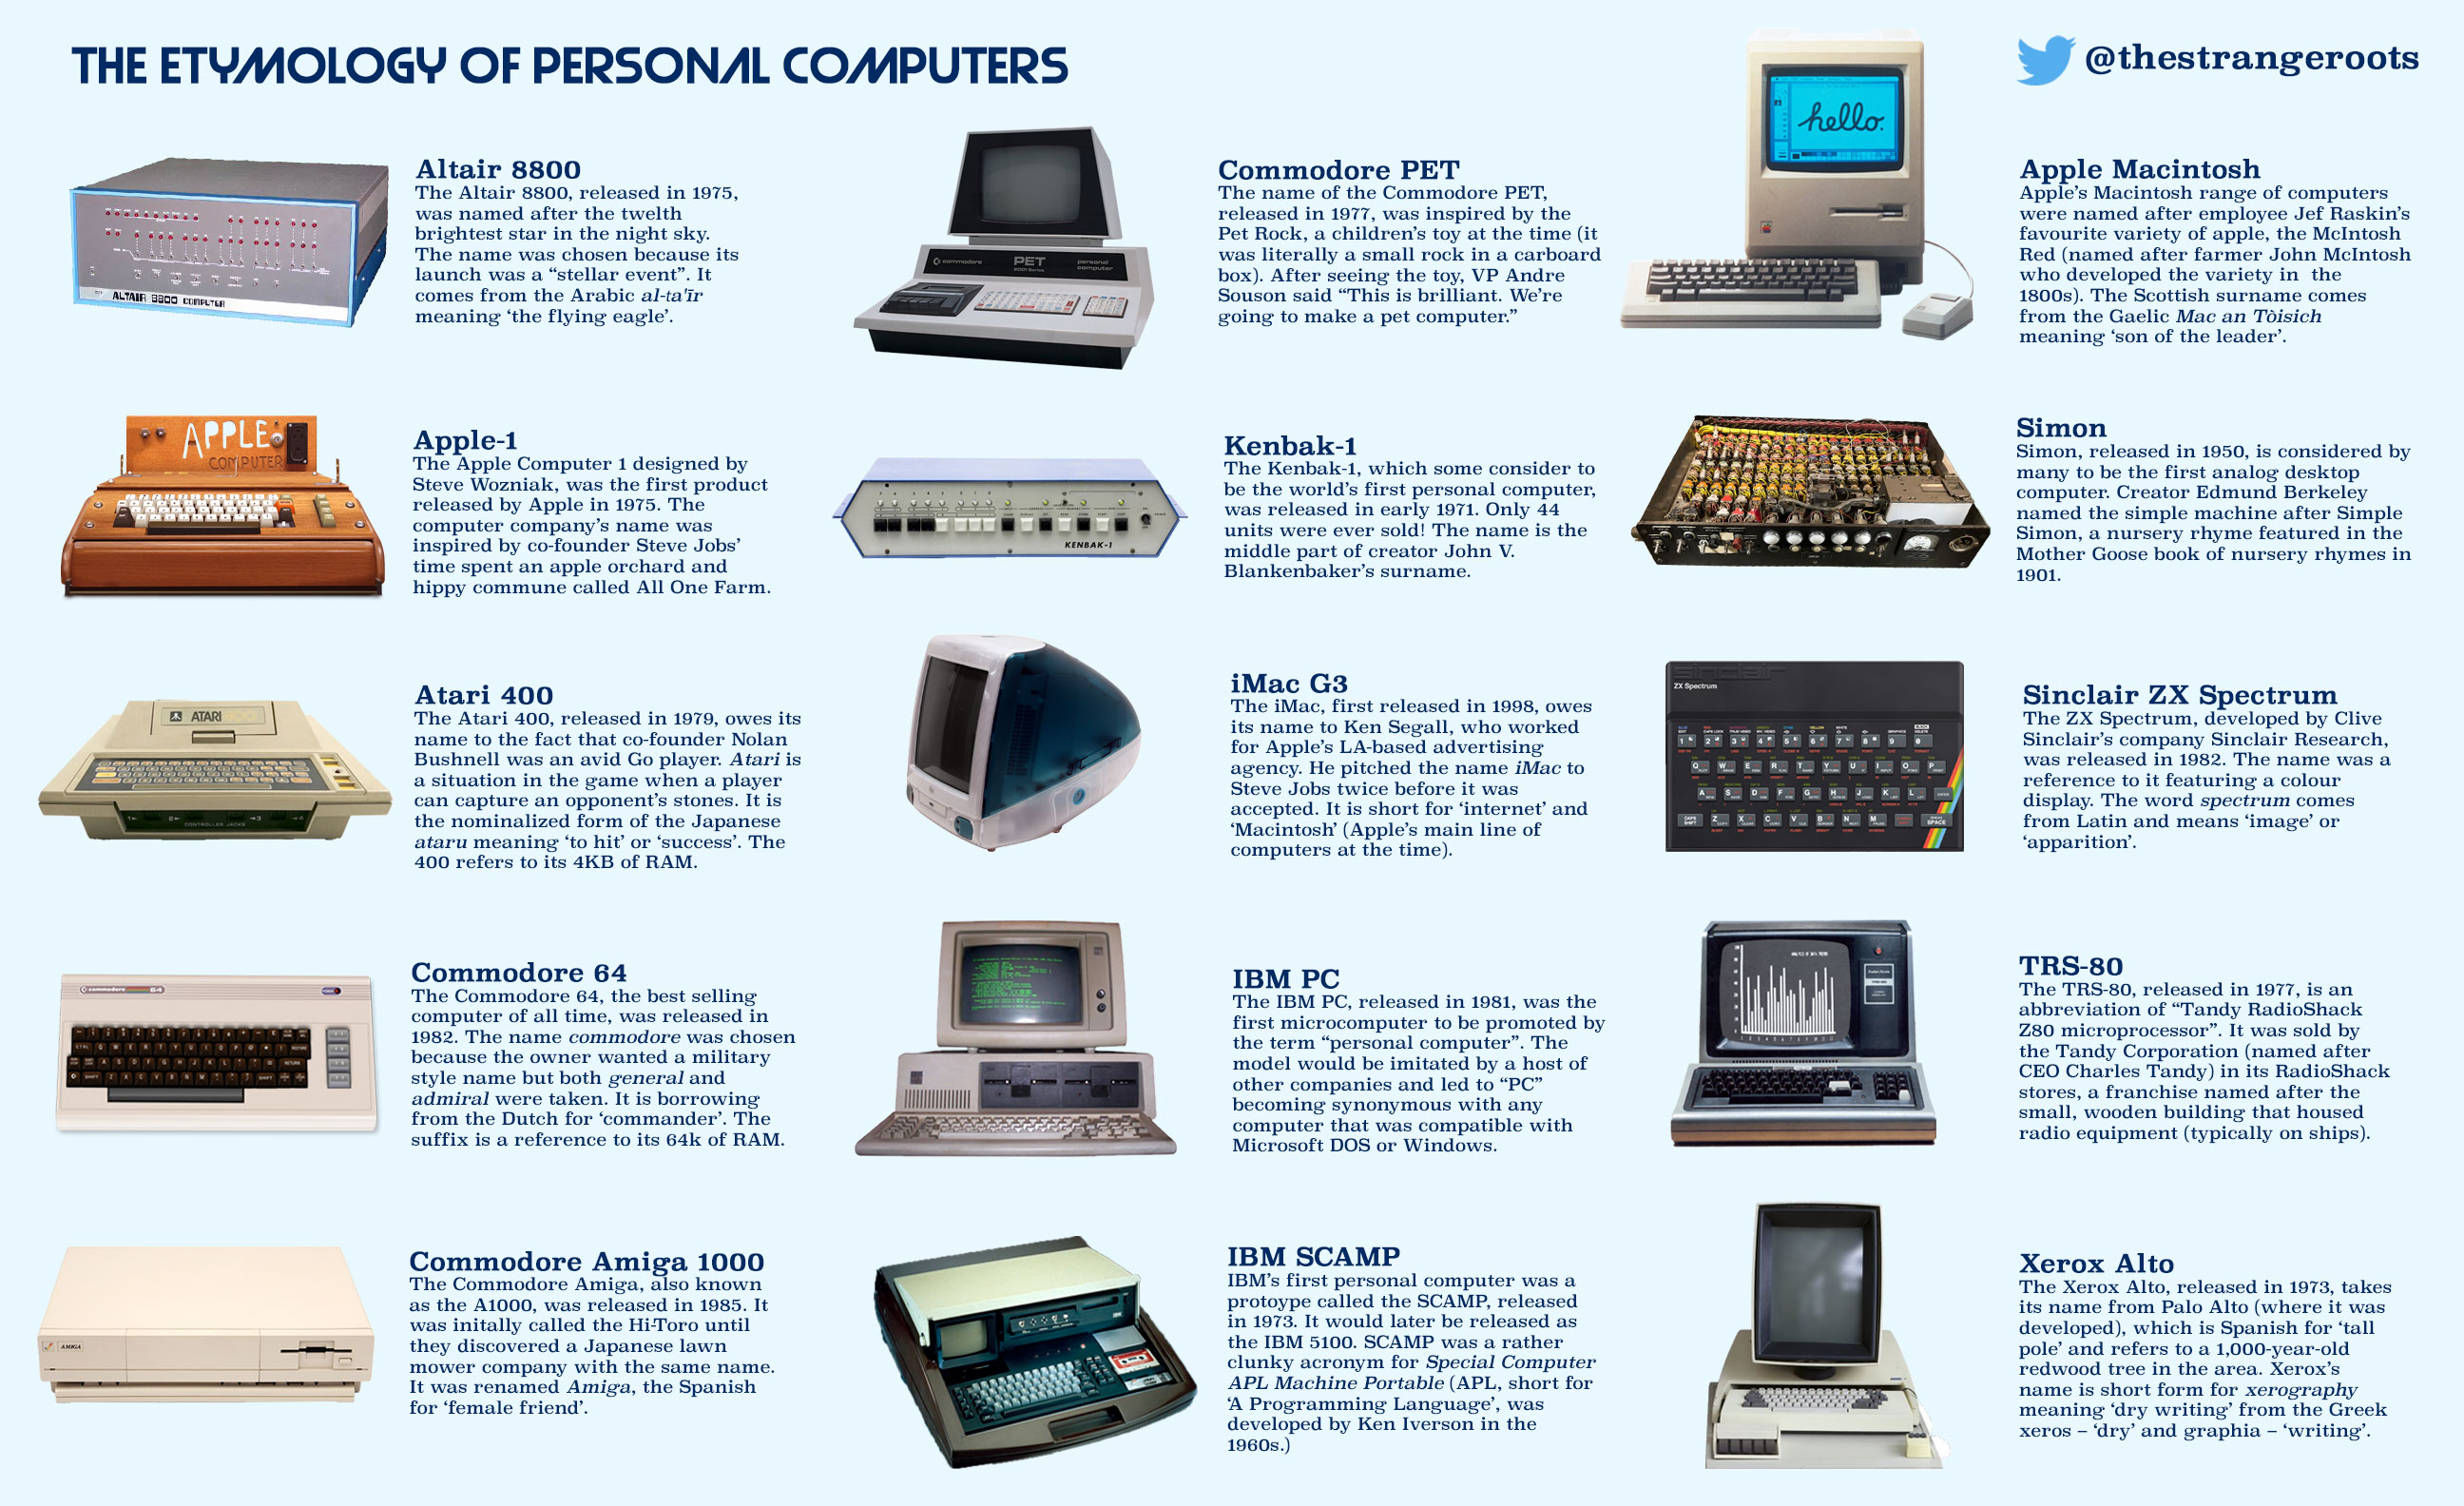 Personal computers